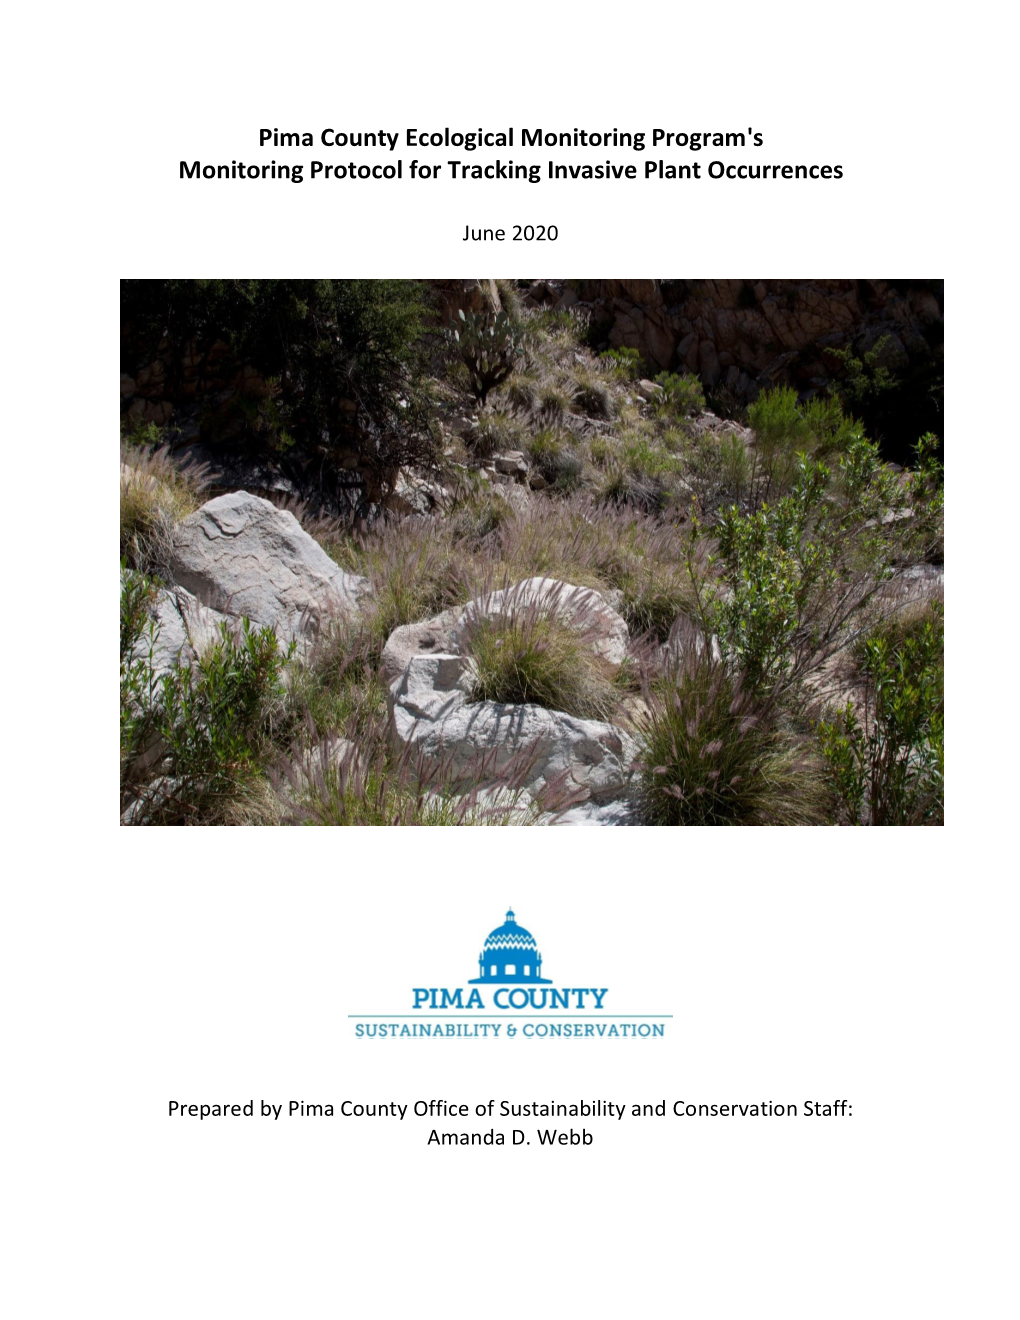 Pima County Ecological Monitoring Program's Monitoring Protocol for Tracking Invasive Plant Occurrences